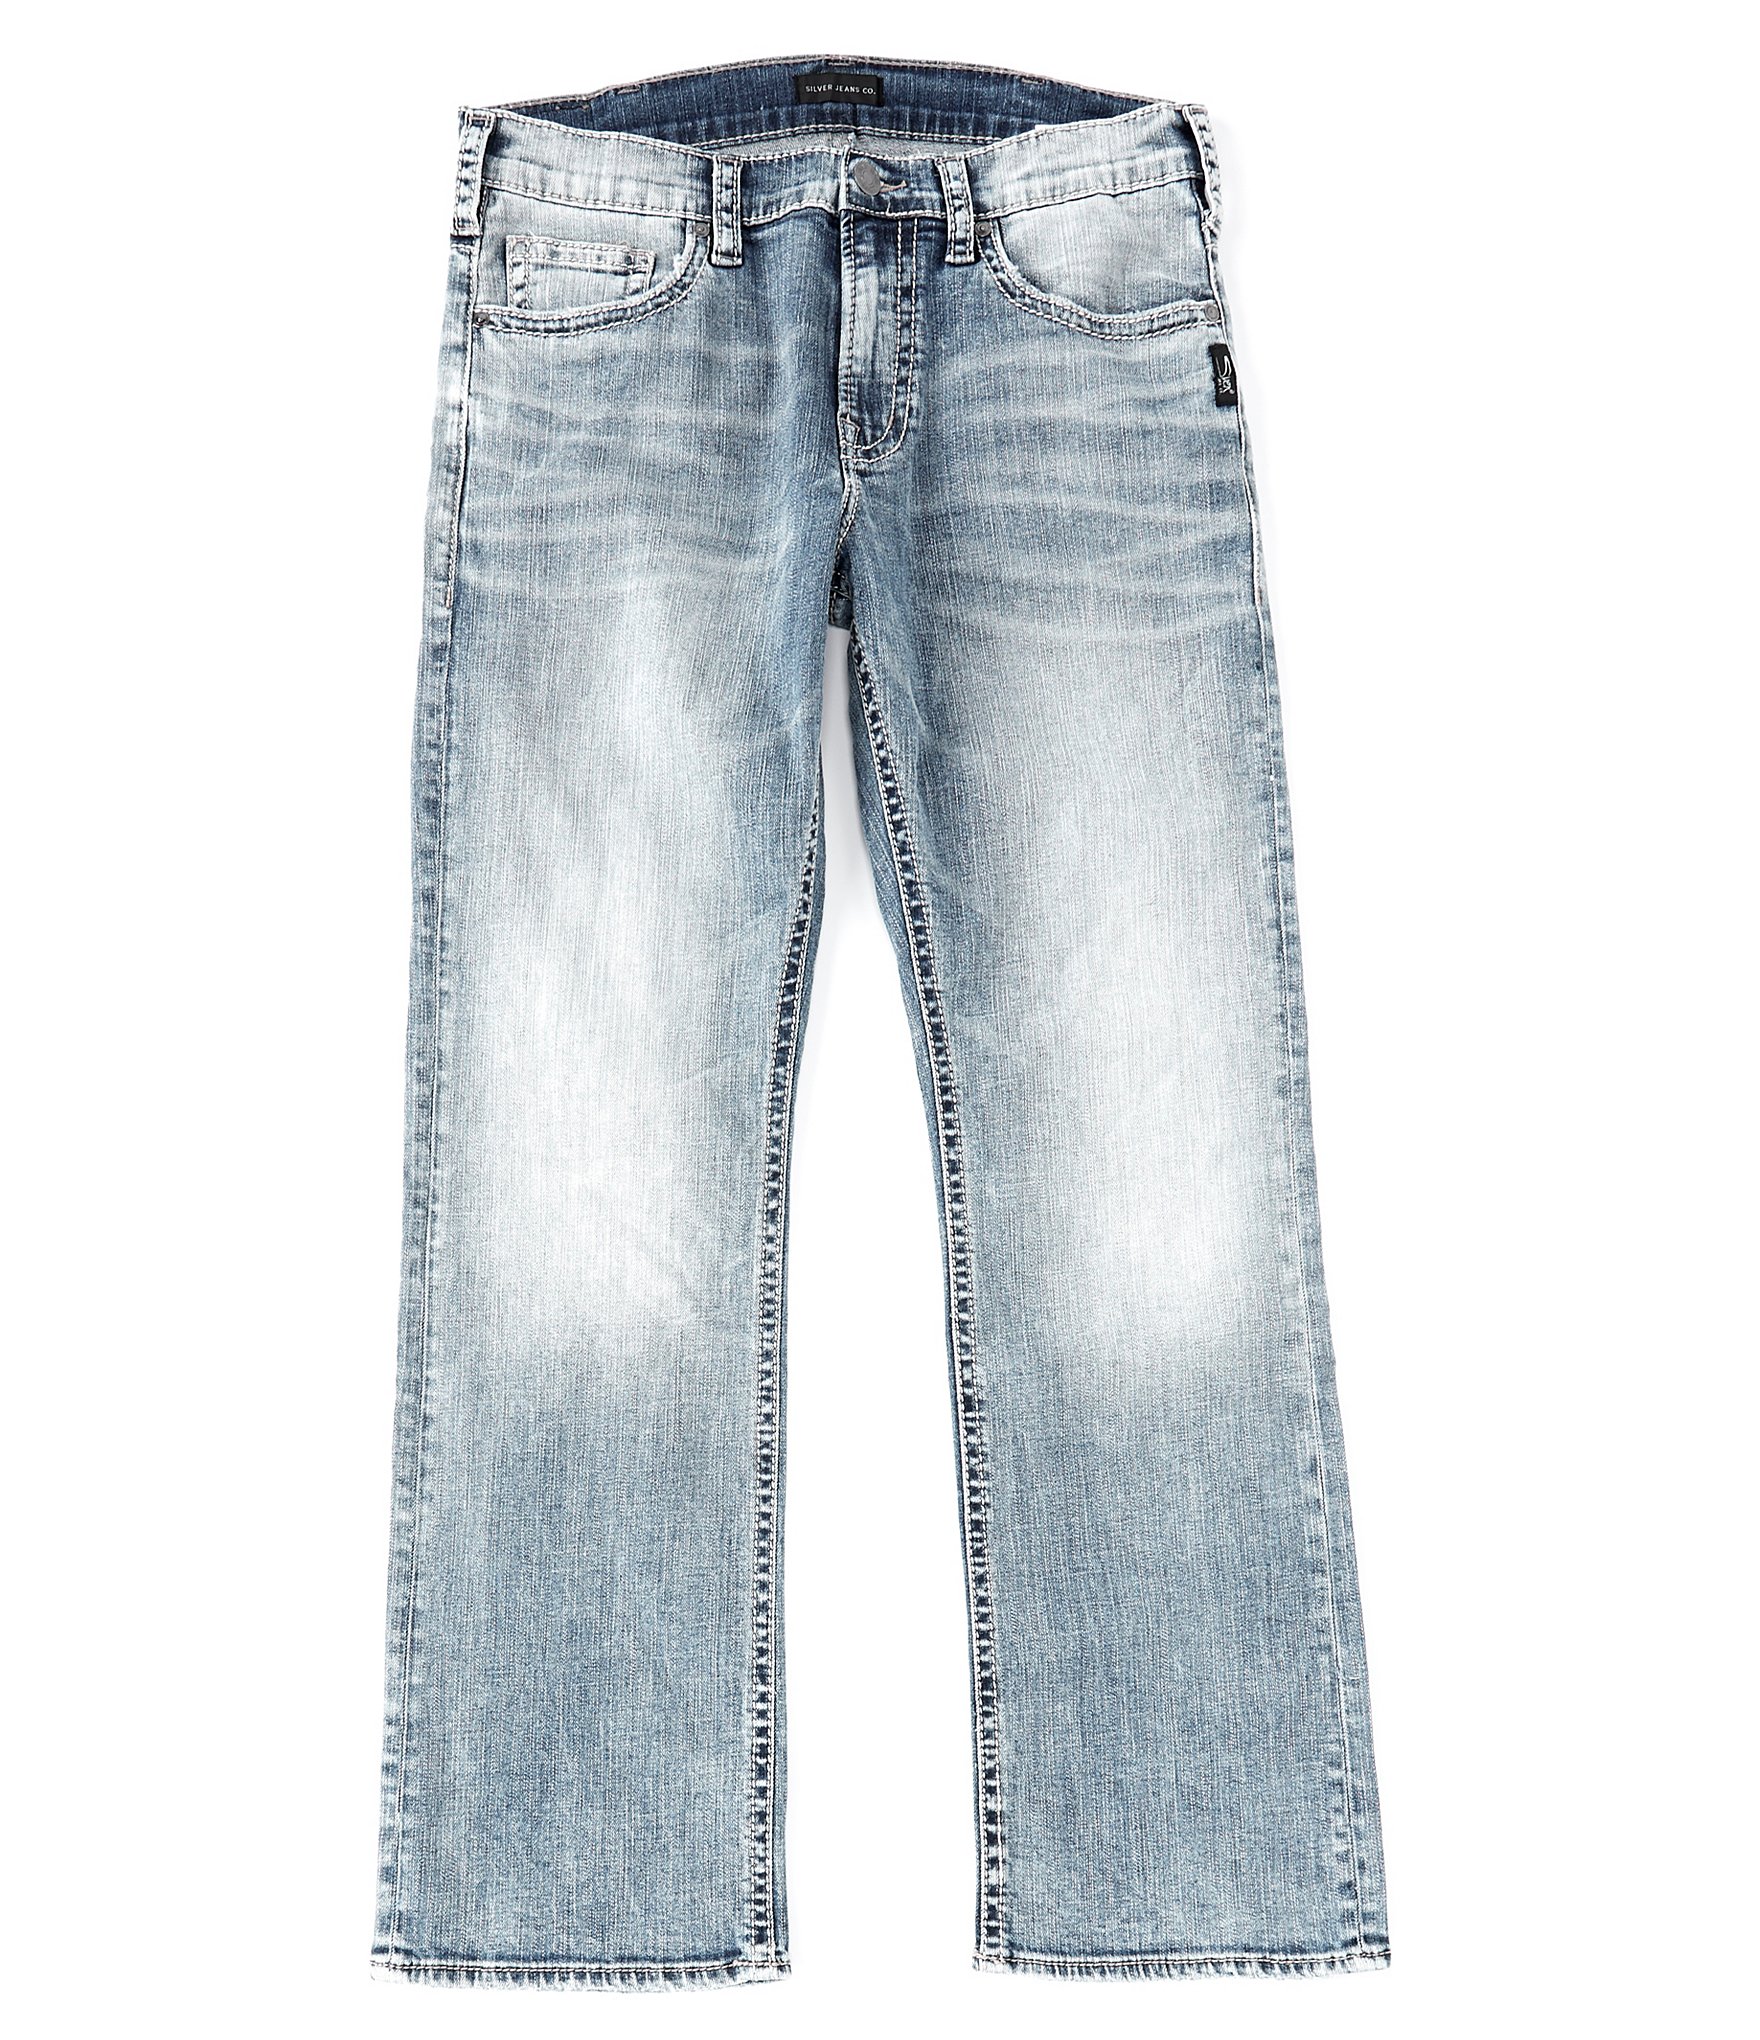 Silver Jeans Co. Zac Light Comfort Stretch Relaxed Fit Jeans | Dillard's